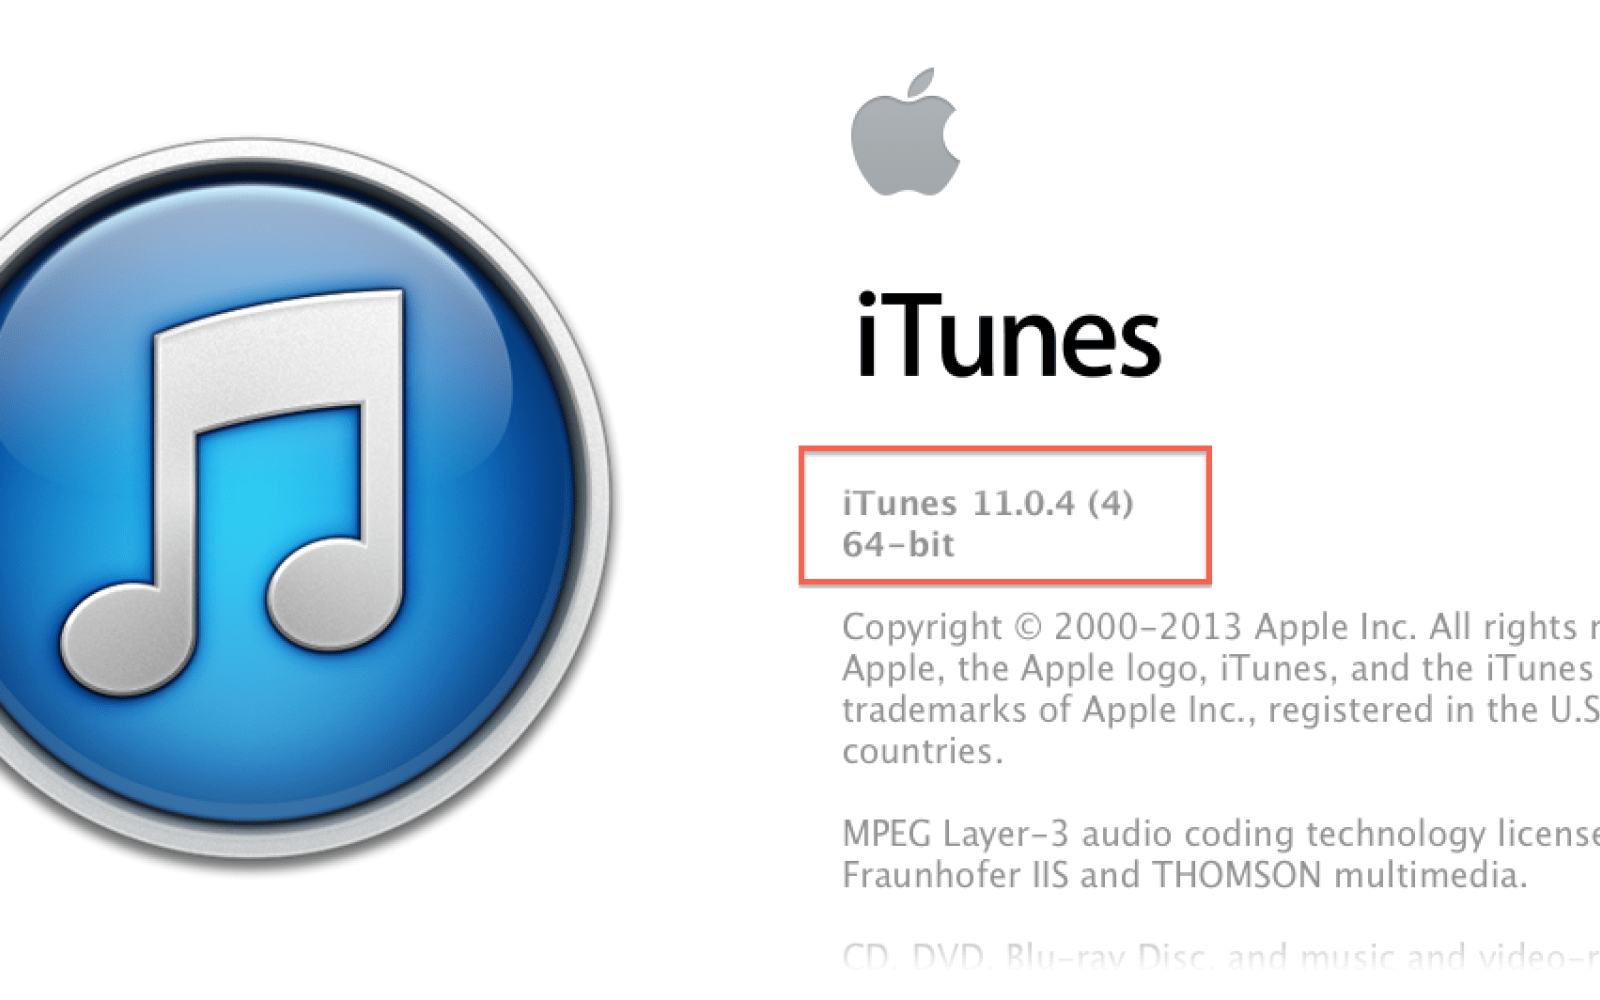 iTunes Store Logo - Apple releases iTunes 11.0.4 with fixes for syncing, iTunes Store ...